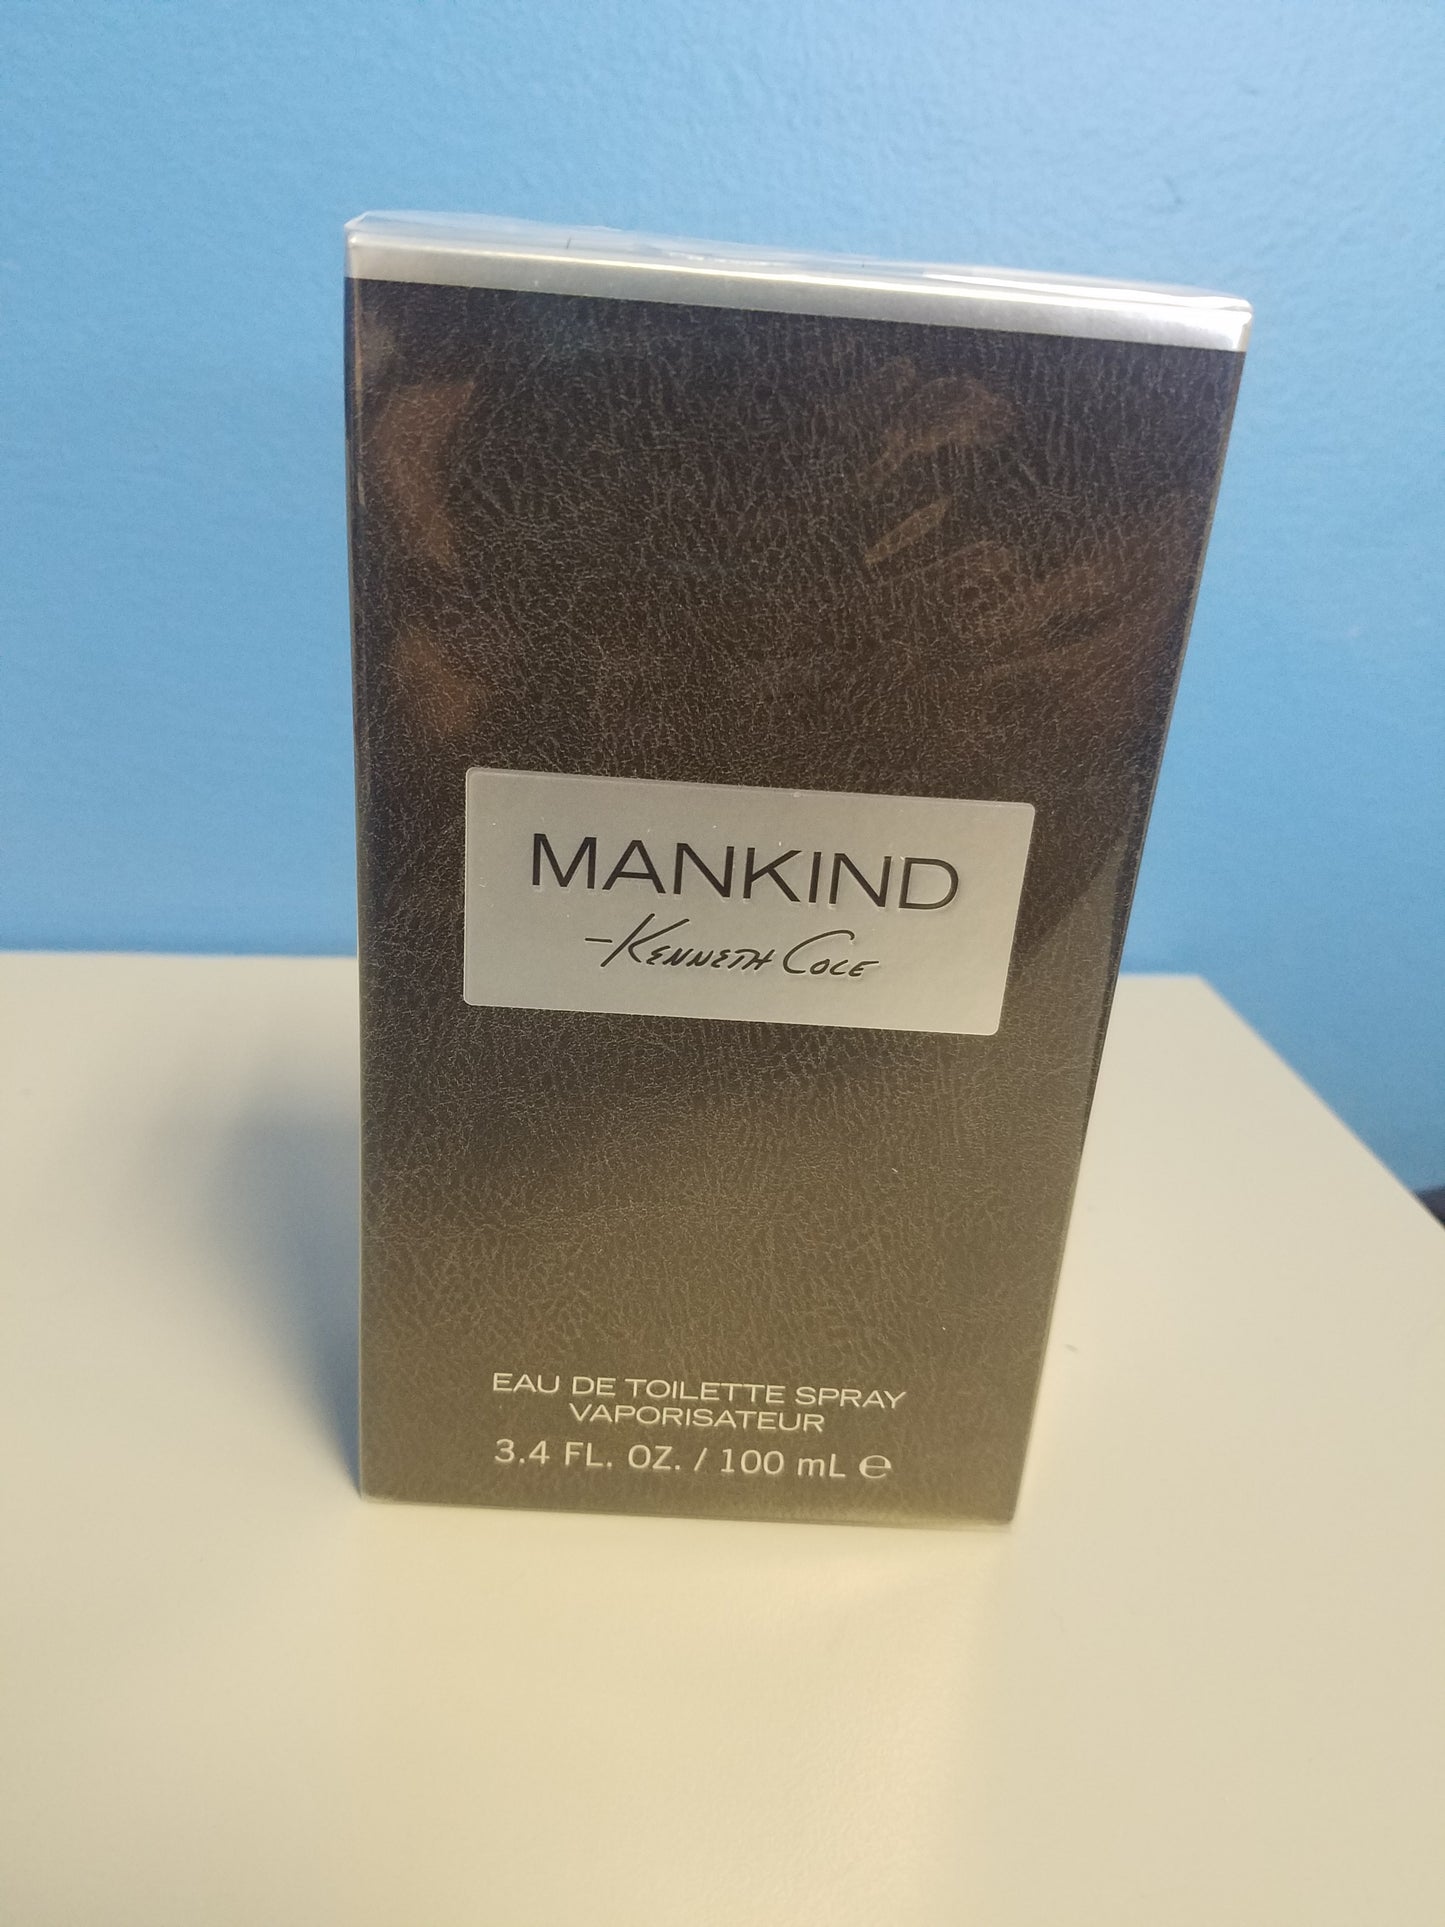 Mankind By Kenneth Cole